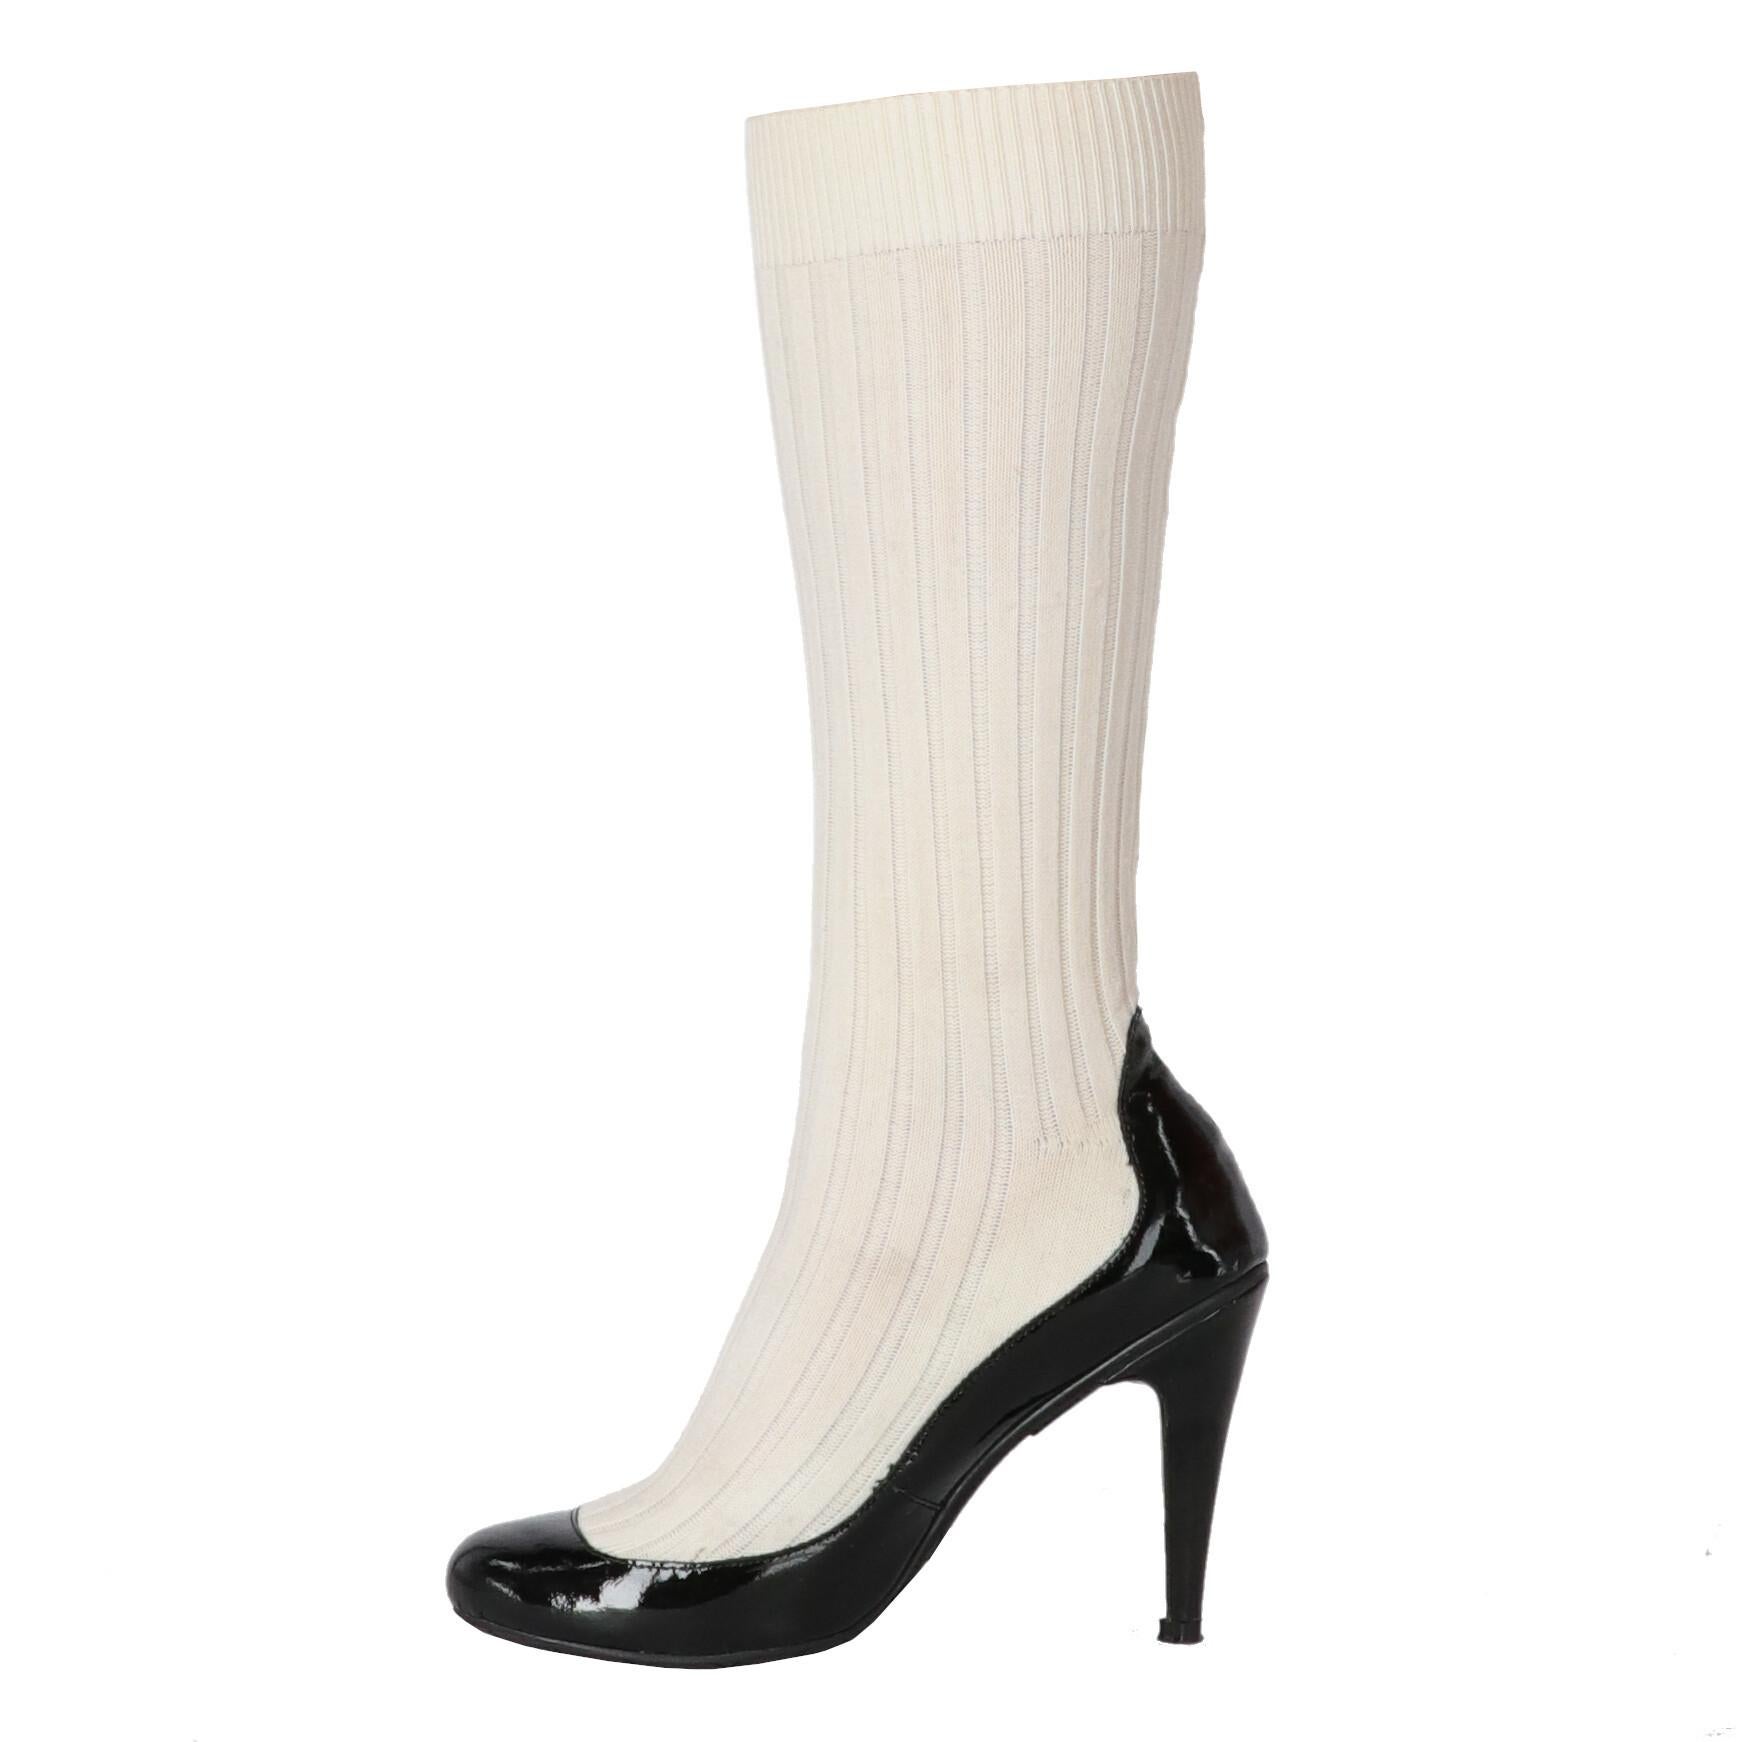 A.N.G.E.L.O. Vintage - ITALY
Chanel mid-calf length patent sock boots, featuring black patent leather pumps and merged knit ribbed white socks. Round toe, high heel and little CC signature glued on the back of the shoe.
They shows very little signs